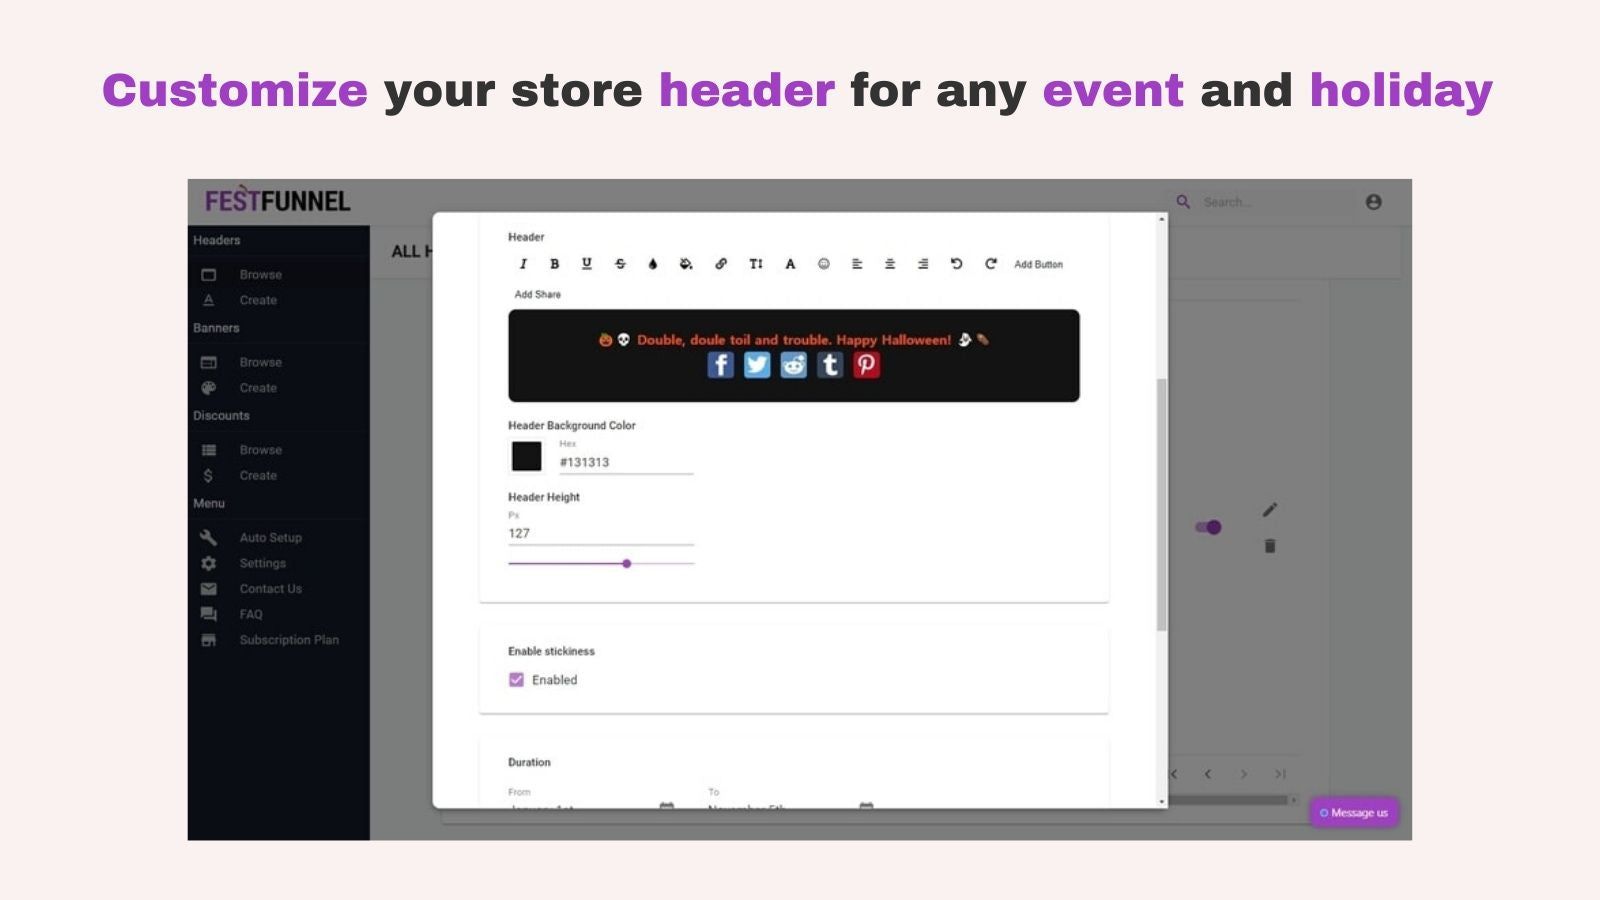 Customize your store header for any event and holiday